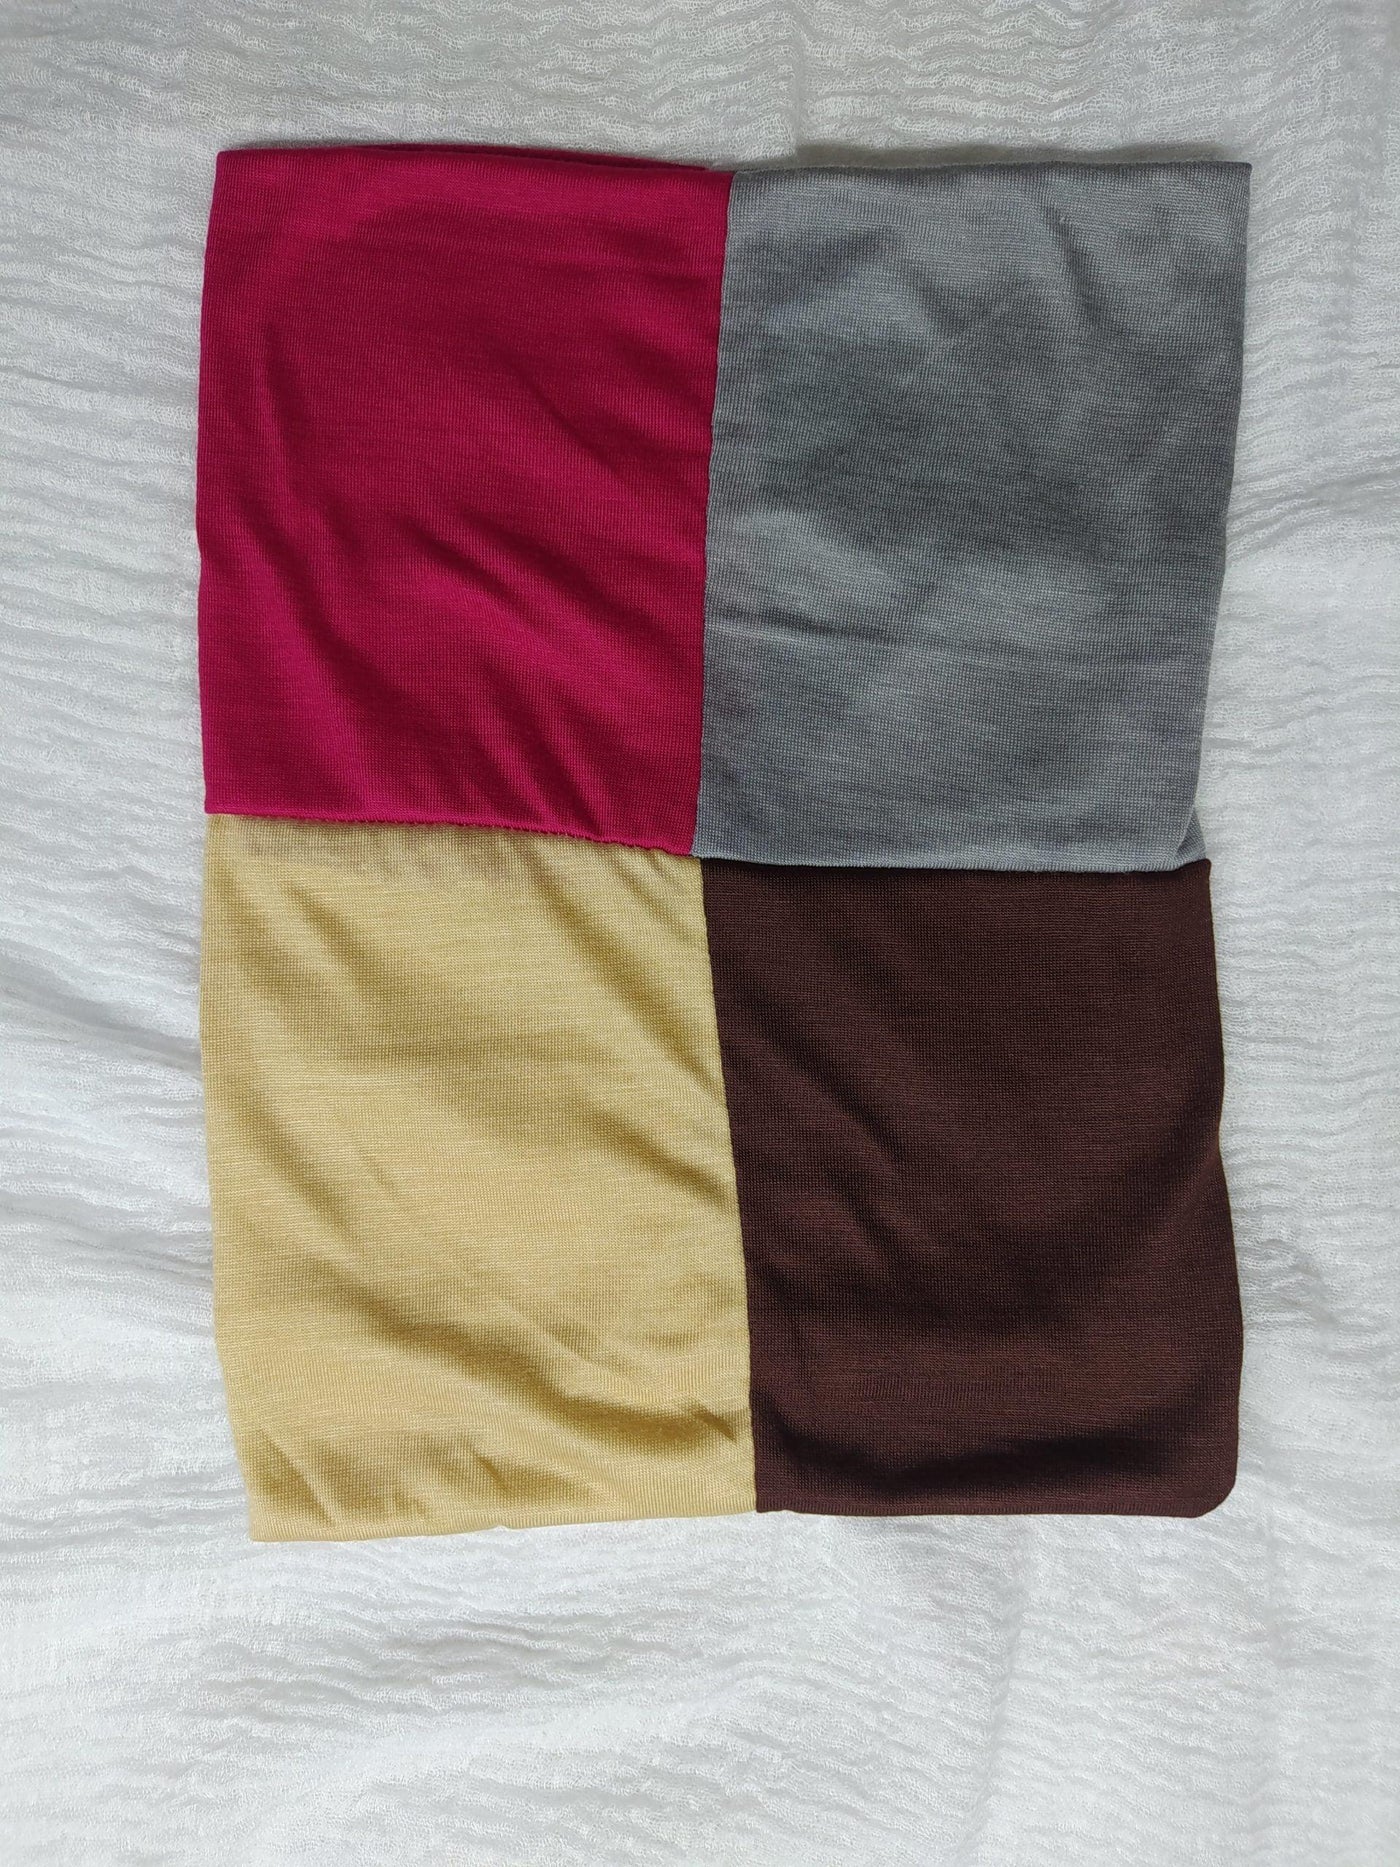 1 in 4 Multi Color Underscarf - Scarfs.pk #1 Online Hijab Store